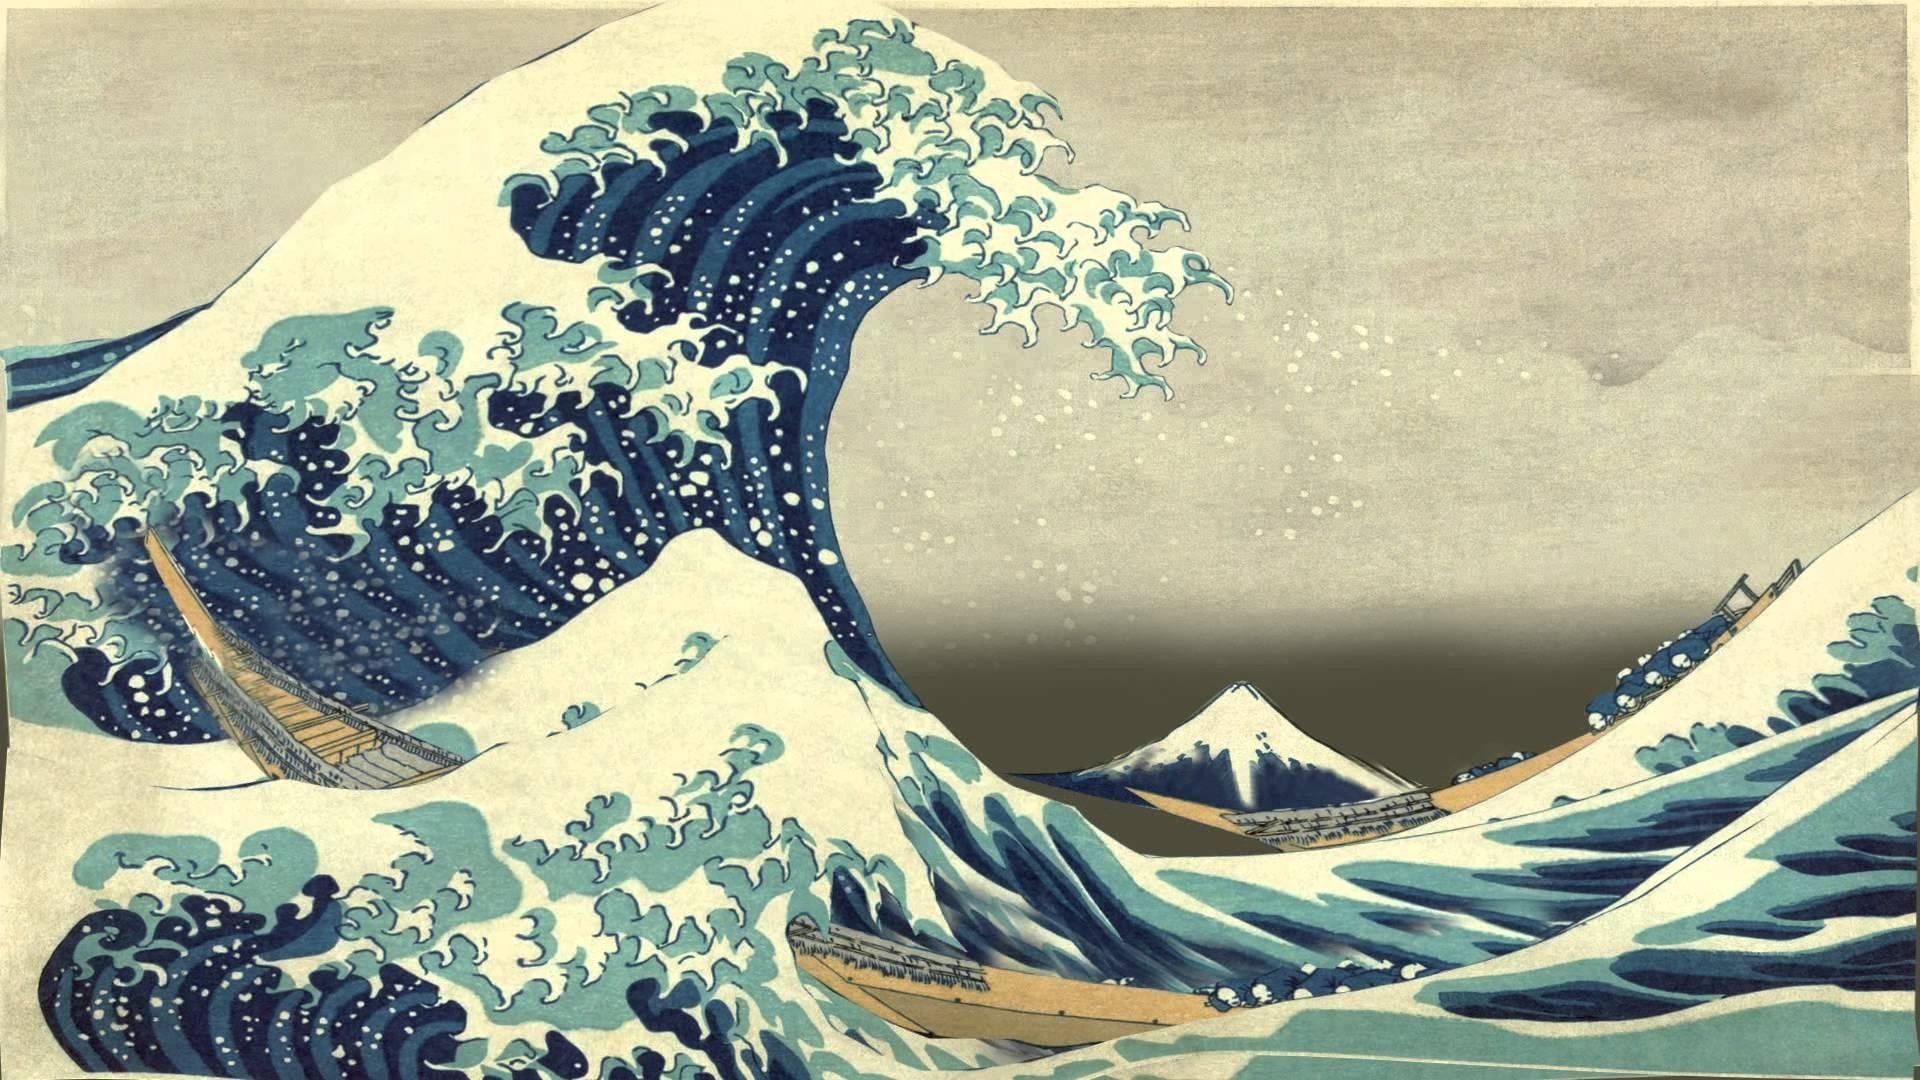  on the great wave off kanagawa hd wallpapers